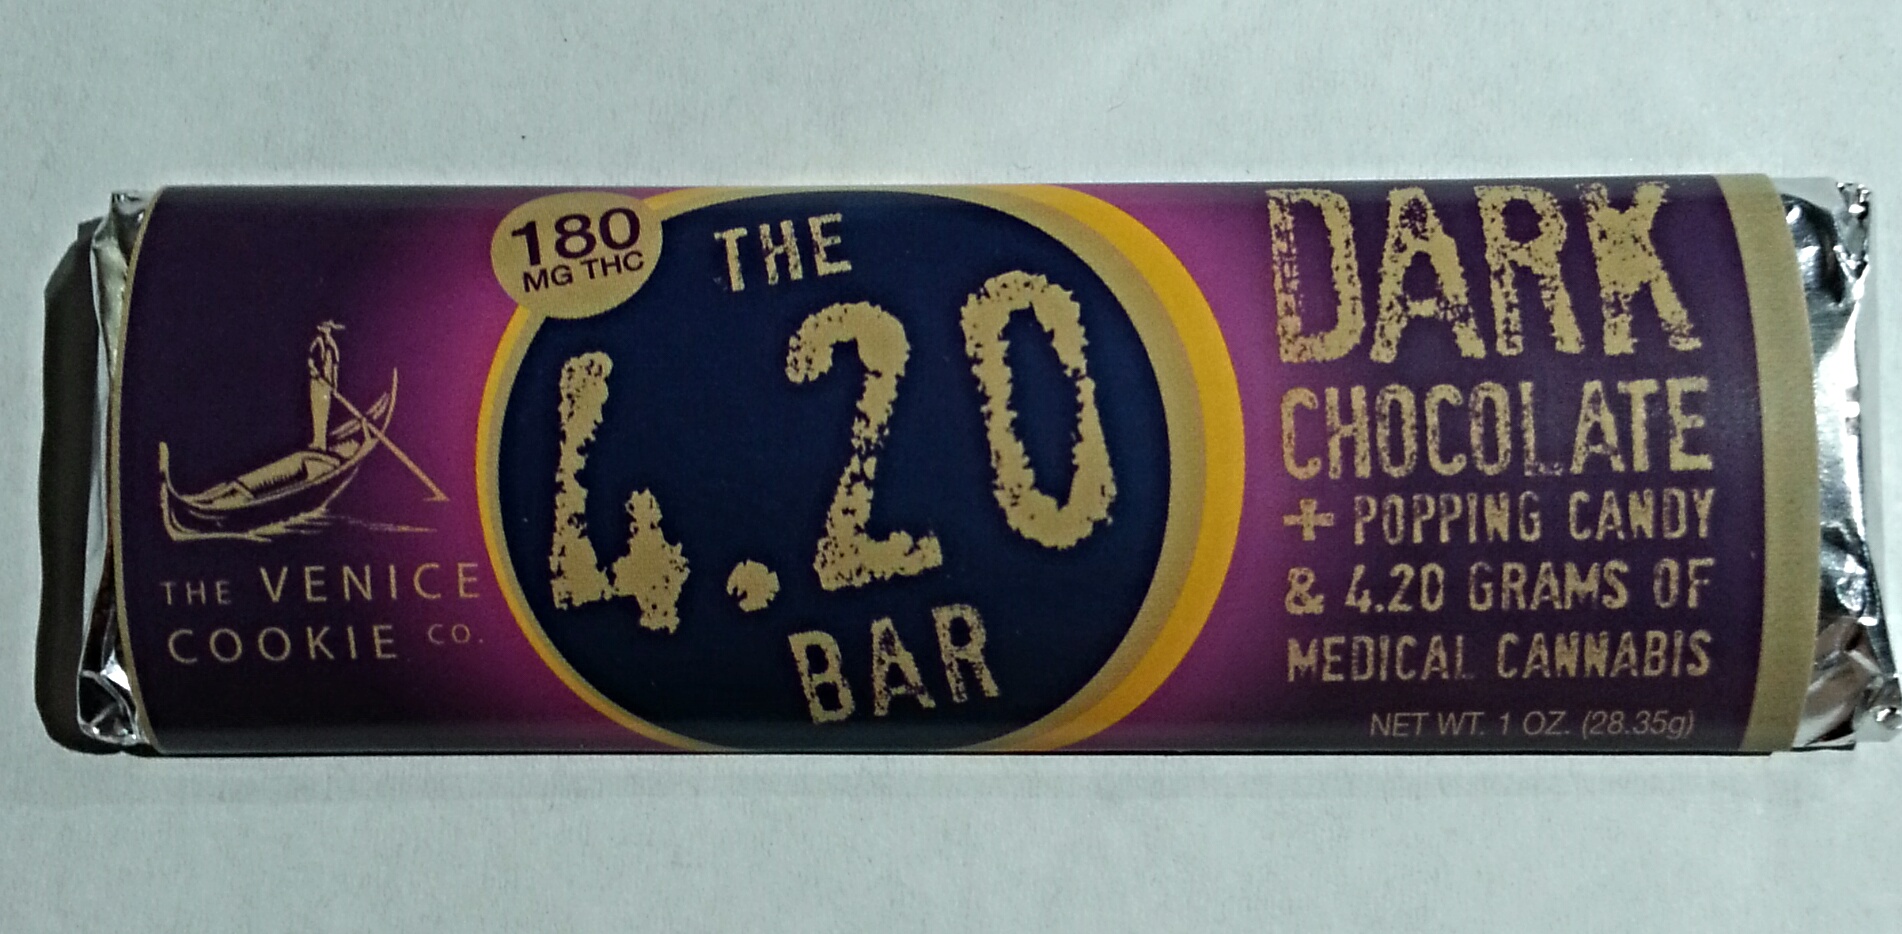 Dark Chocolate and Popping Candy 4.20 Bar from The Venice Cookie Company Edible Review